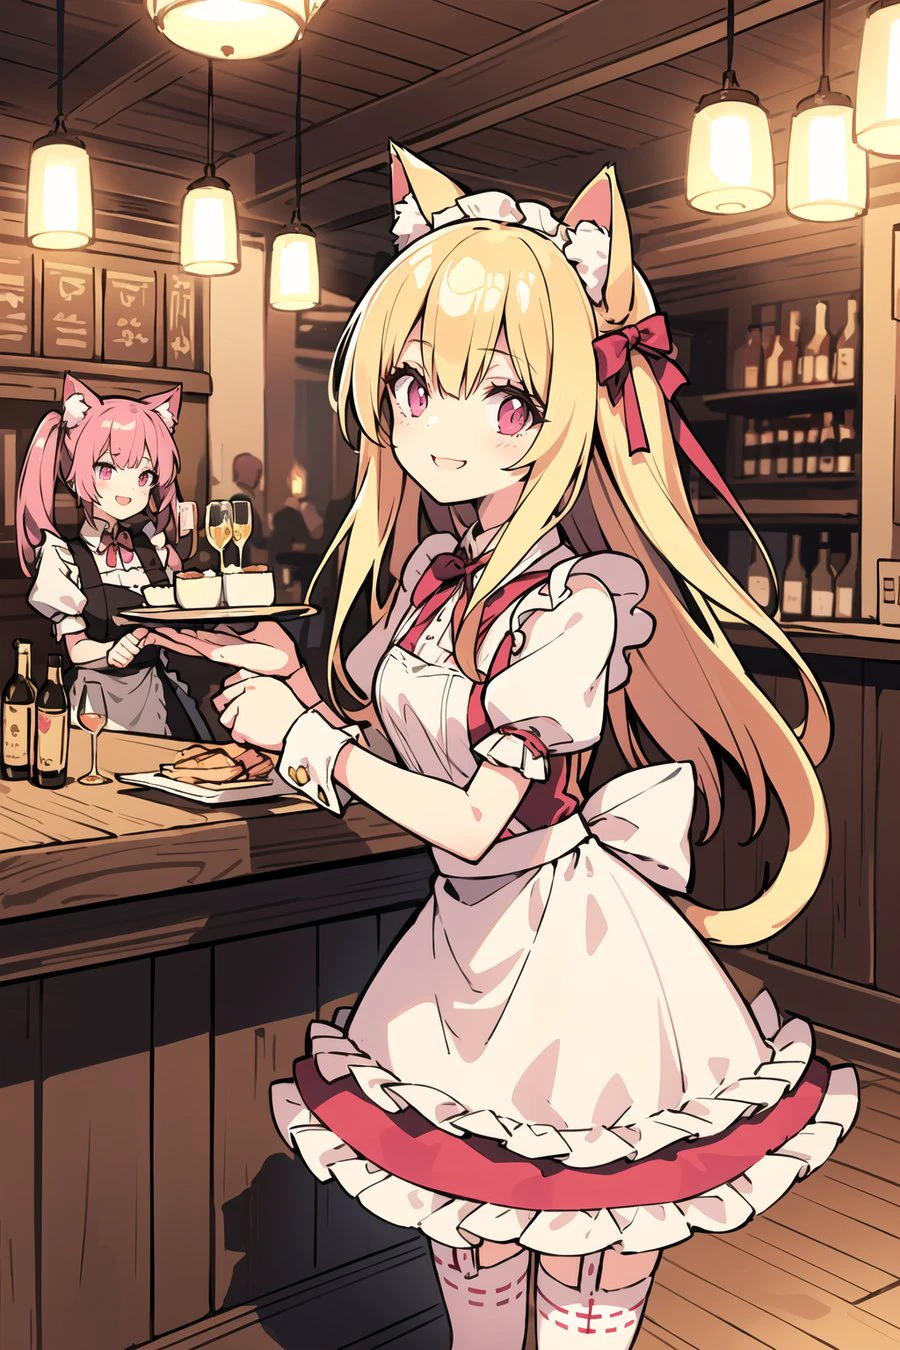 masterpiece, best quality, ultra-detailed, original characters, portrait of a young catgirl maid smiling with cute pink eyes, long blonde hair with cat ears and pink ribbon, pink and white maid outfit with lace and frills, short skirt showing white stockings and garters. Background is a tavern setting with wooden tables and chairs covered with red tablecloths and cushions, barrels and bottles of various drinks on the shelves and the floor, customers and staff of different races and outfits chatting and laughing, candlelight creating a warm glow on the walls and the ceiling. Cozy atmosphere with music playing from a jukebox in the corner. Overall pink and brown color theme giving a warm, sweet and lovely feeling. (holding a tray with drinks: 1.05), (cat tail swinging behind her: 1.1)